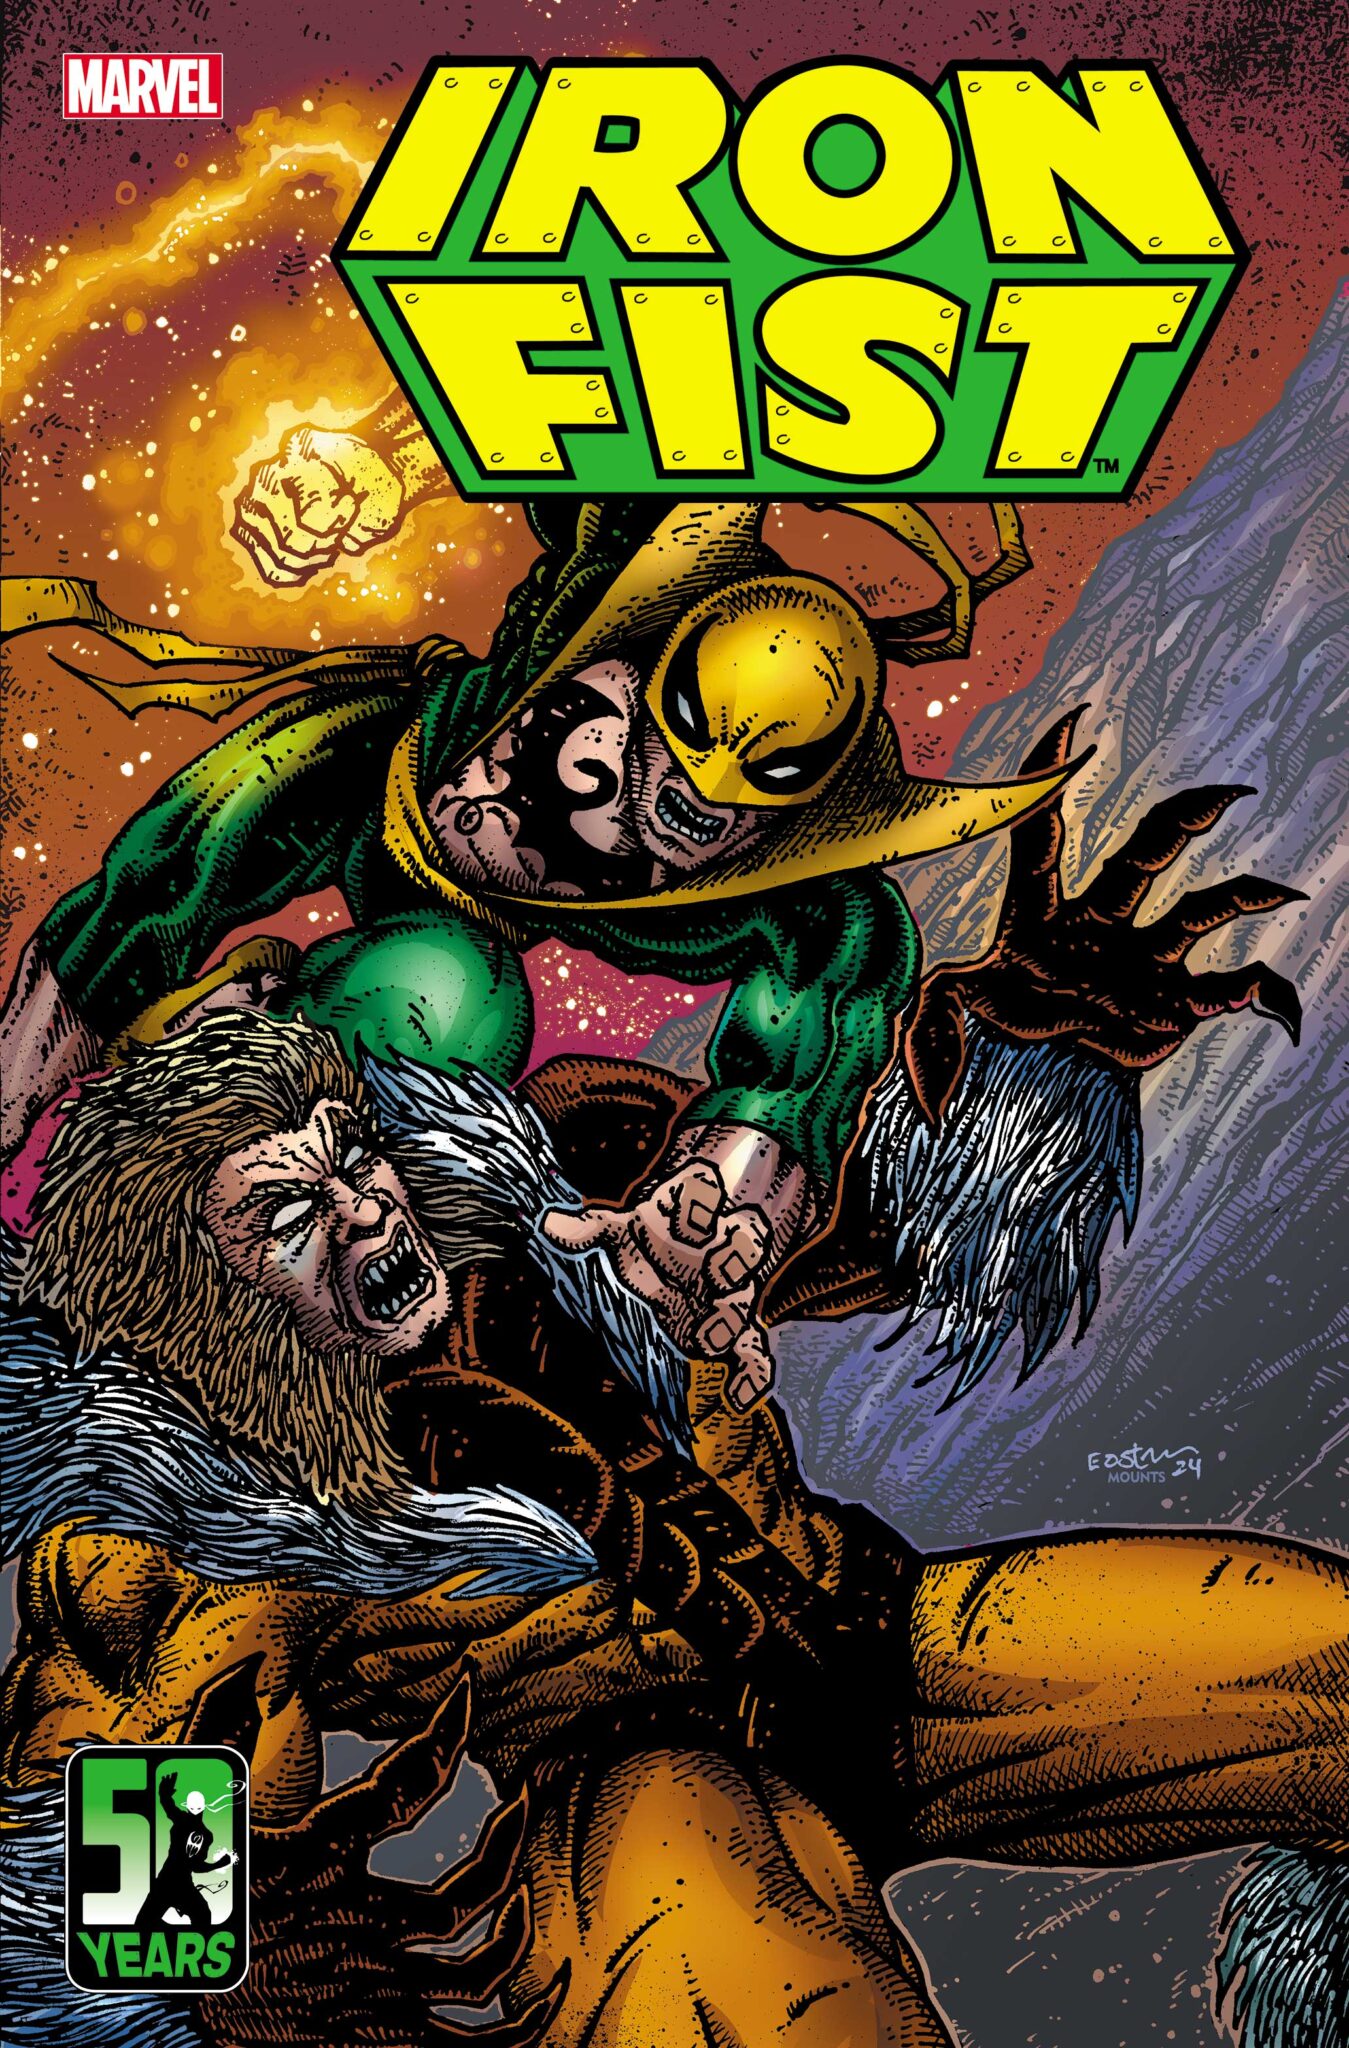 Iron Fist 50th Anniversary Special Variant Cover by KEVIN EASTMAN